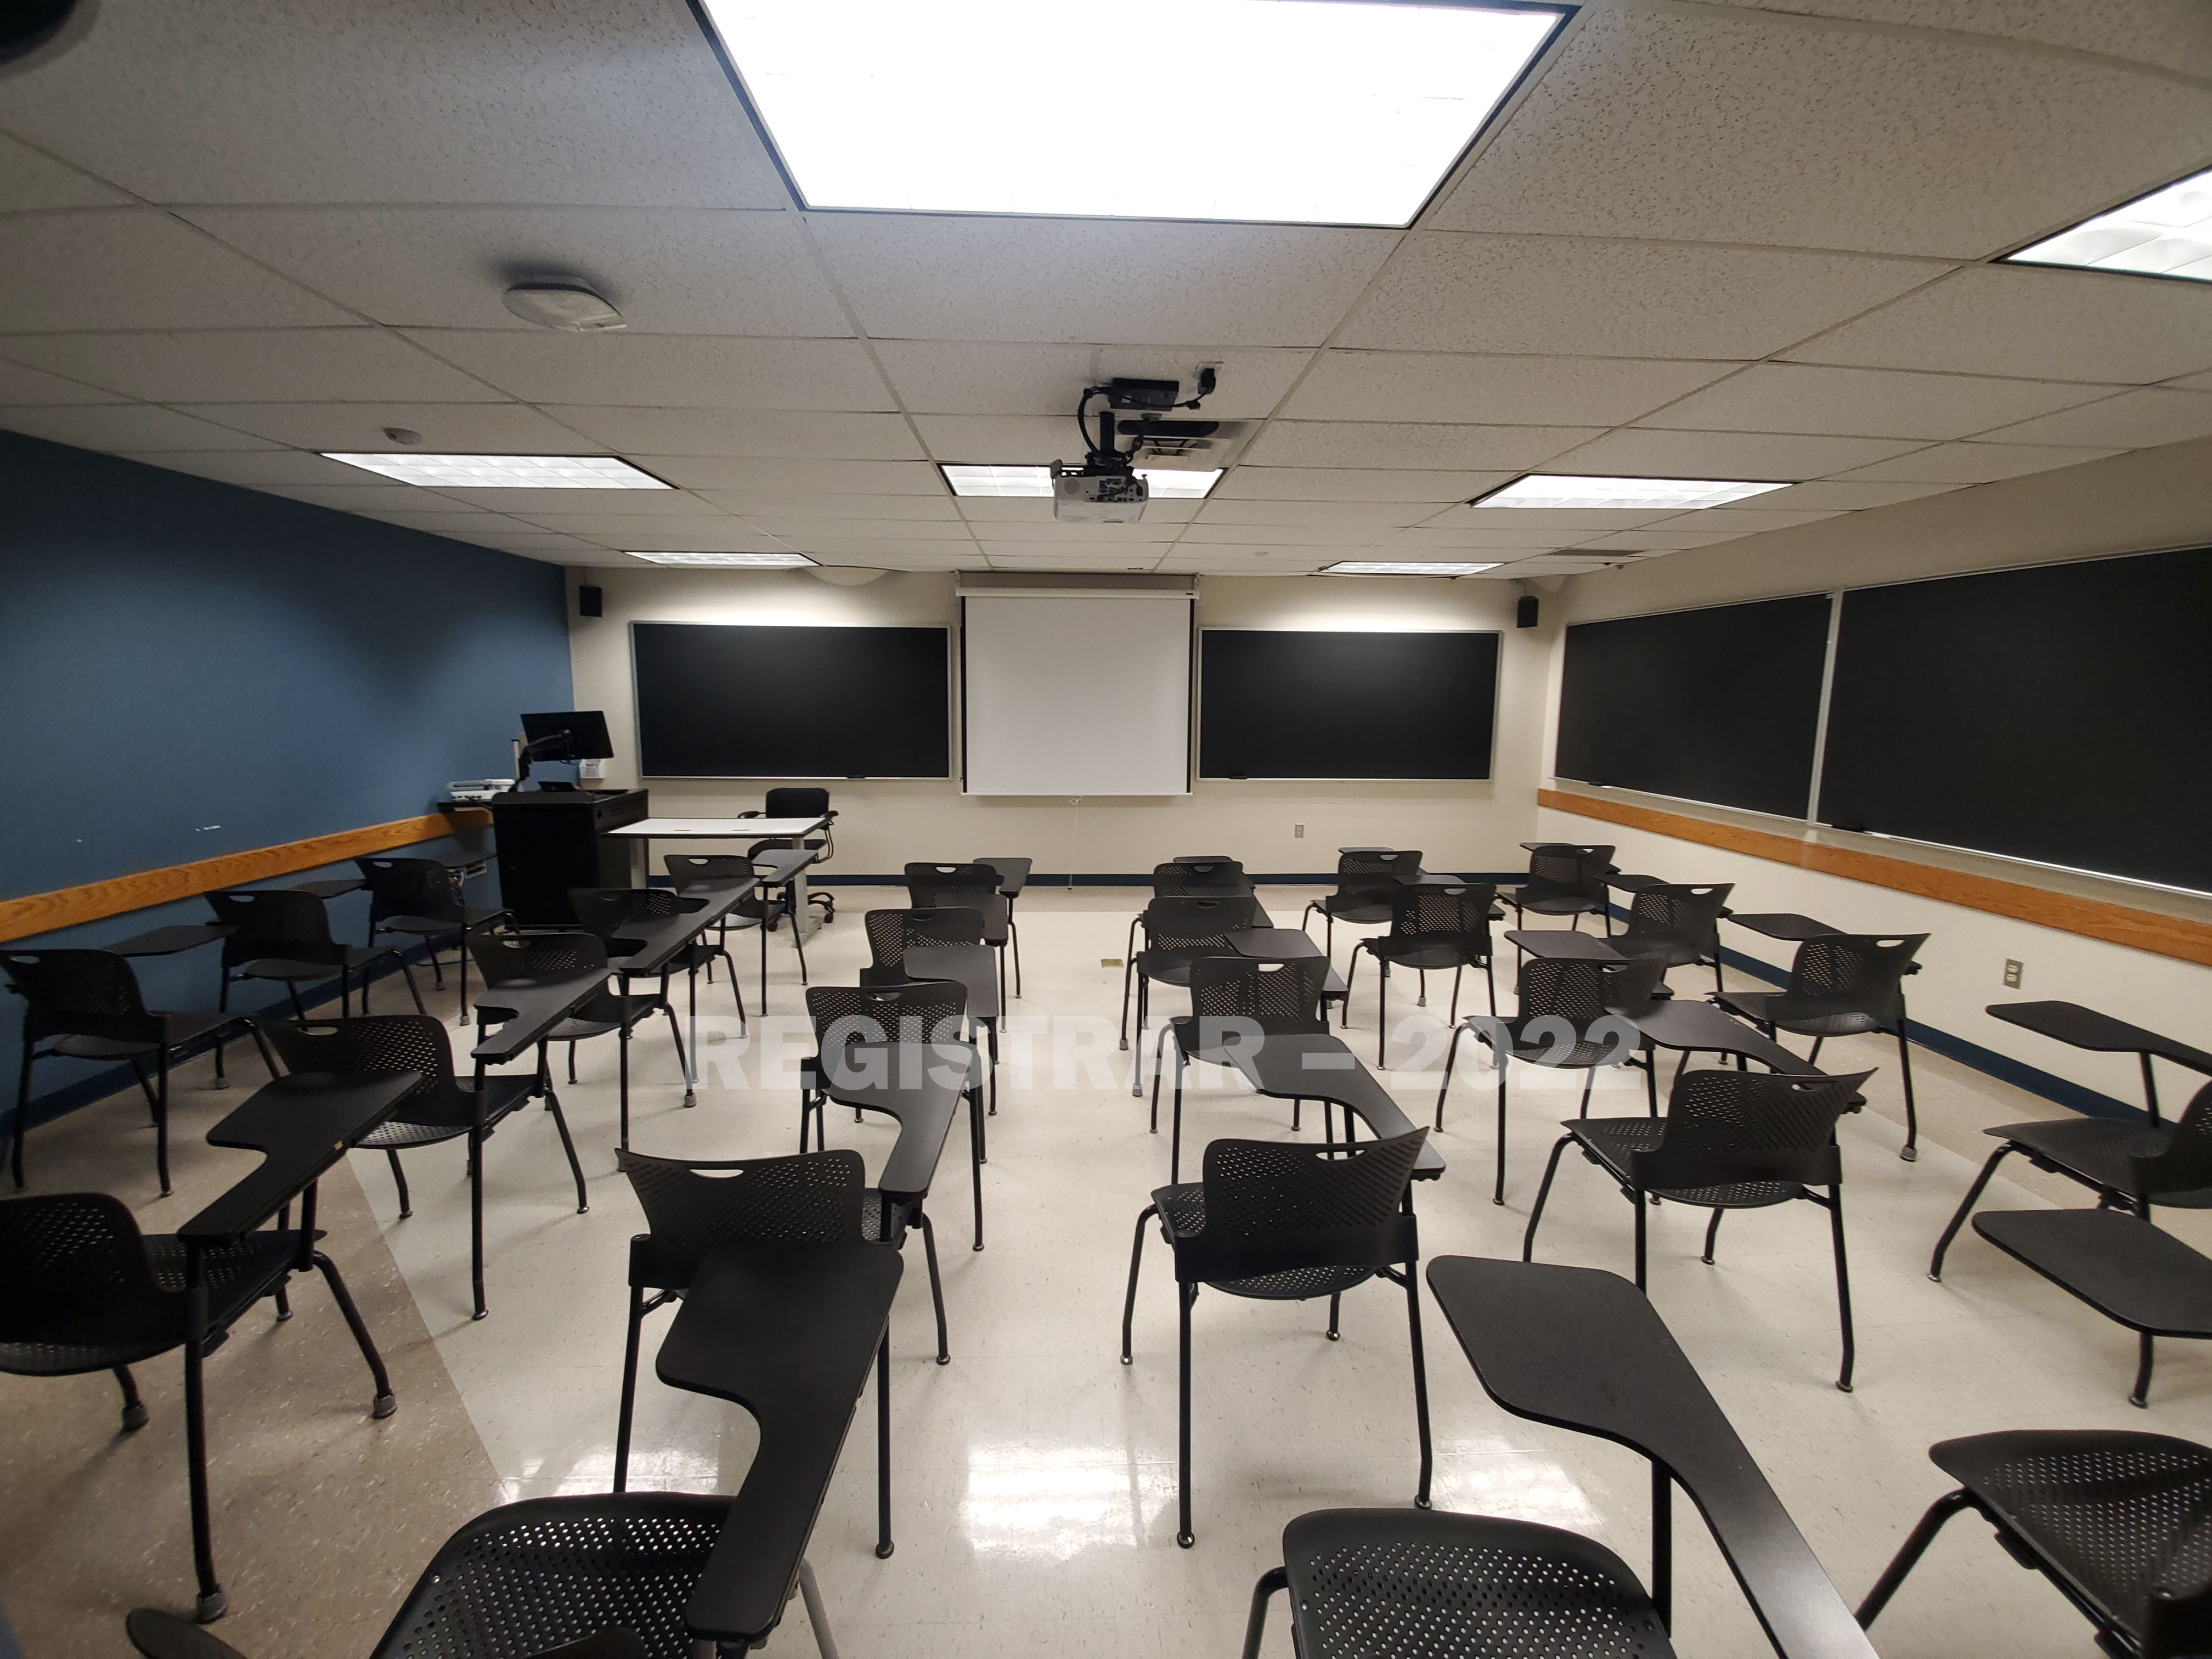 Enarson Classroom Building room 243 ultra wide angle view from the back of the room with projector screen down